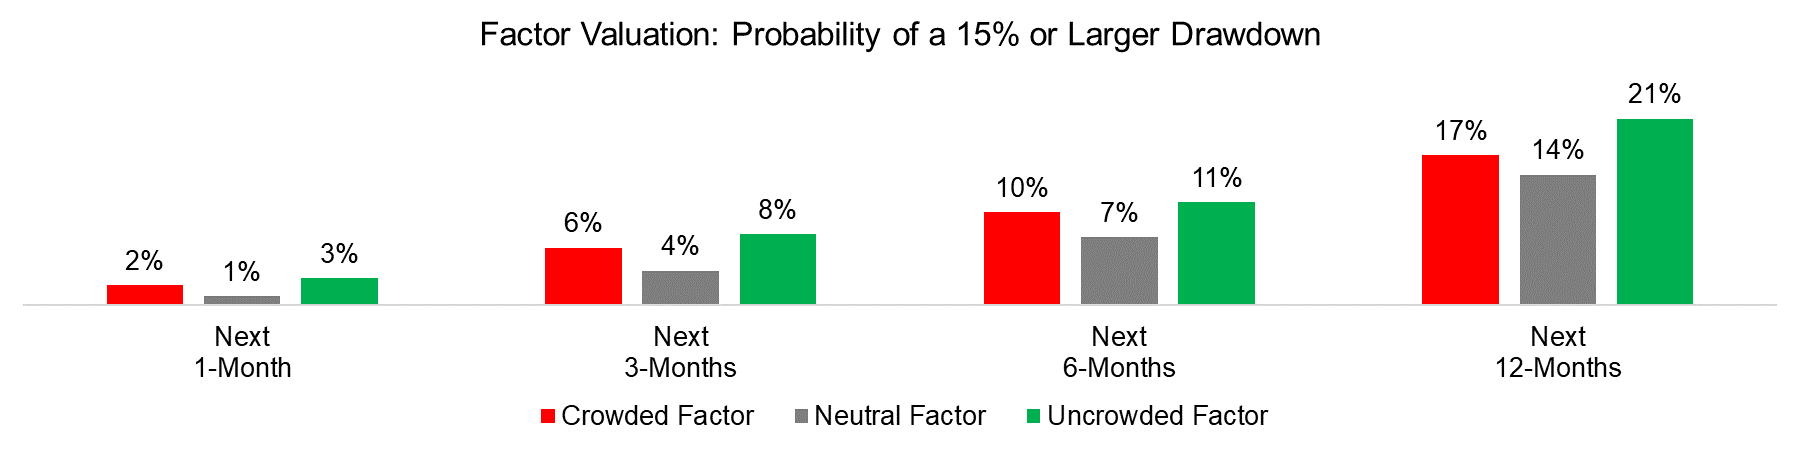 Factor Valuation Probability of a 15% or Larger Drawdown